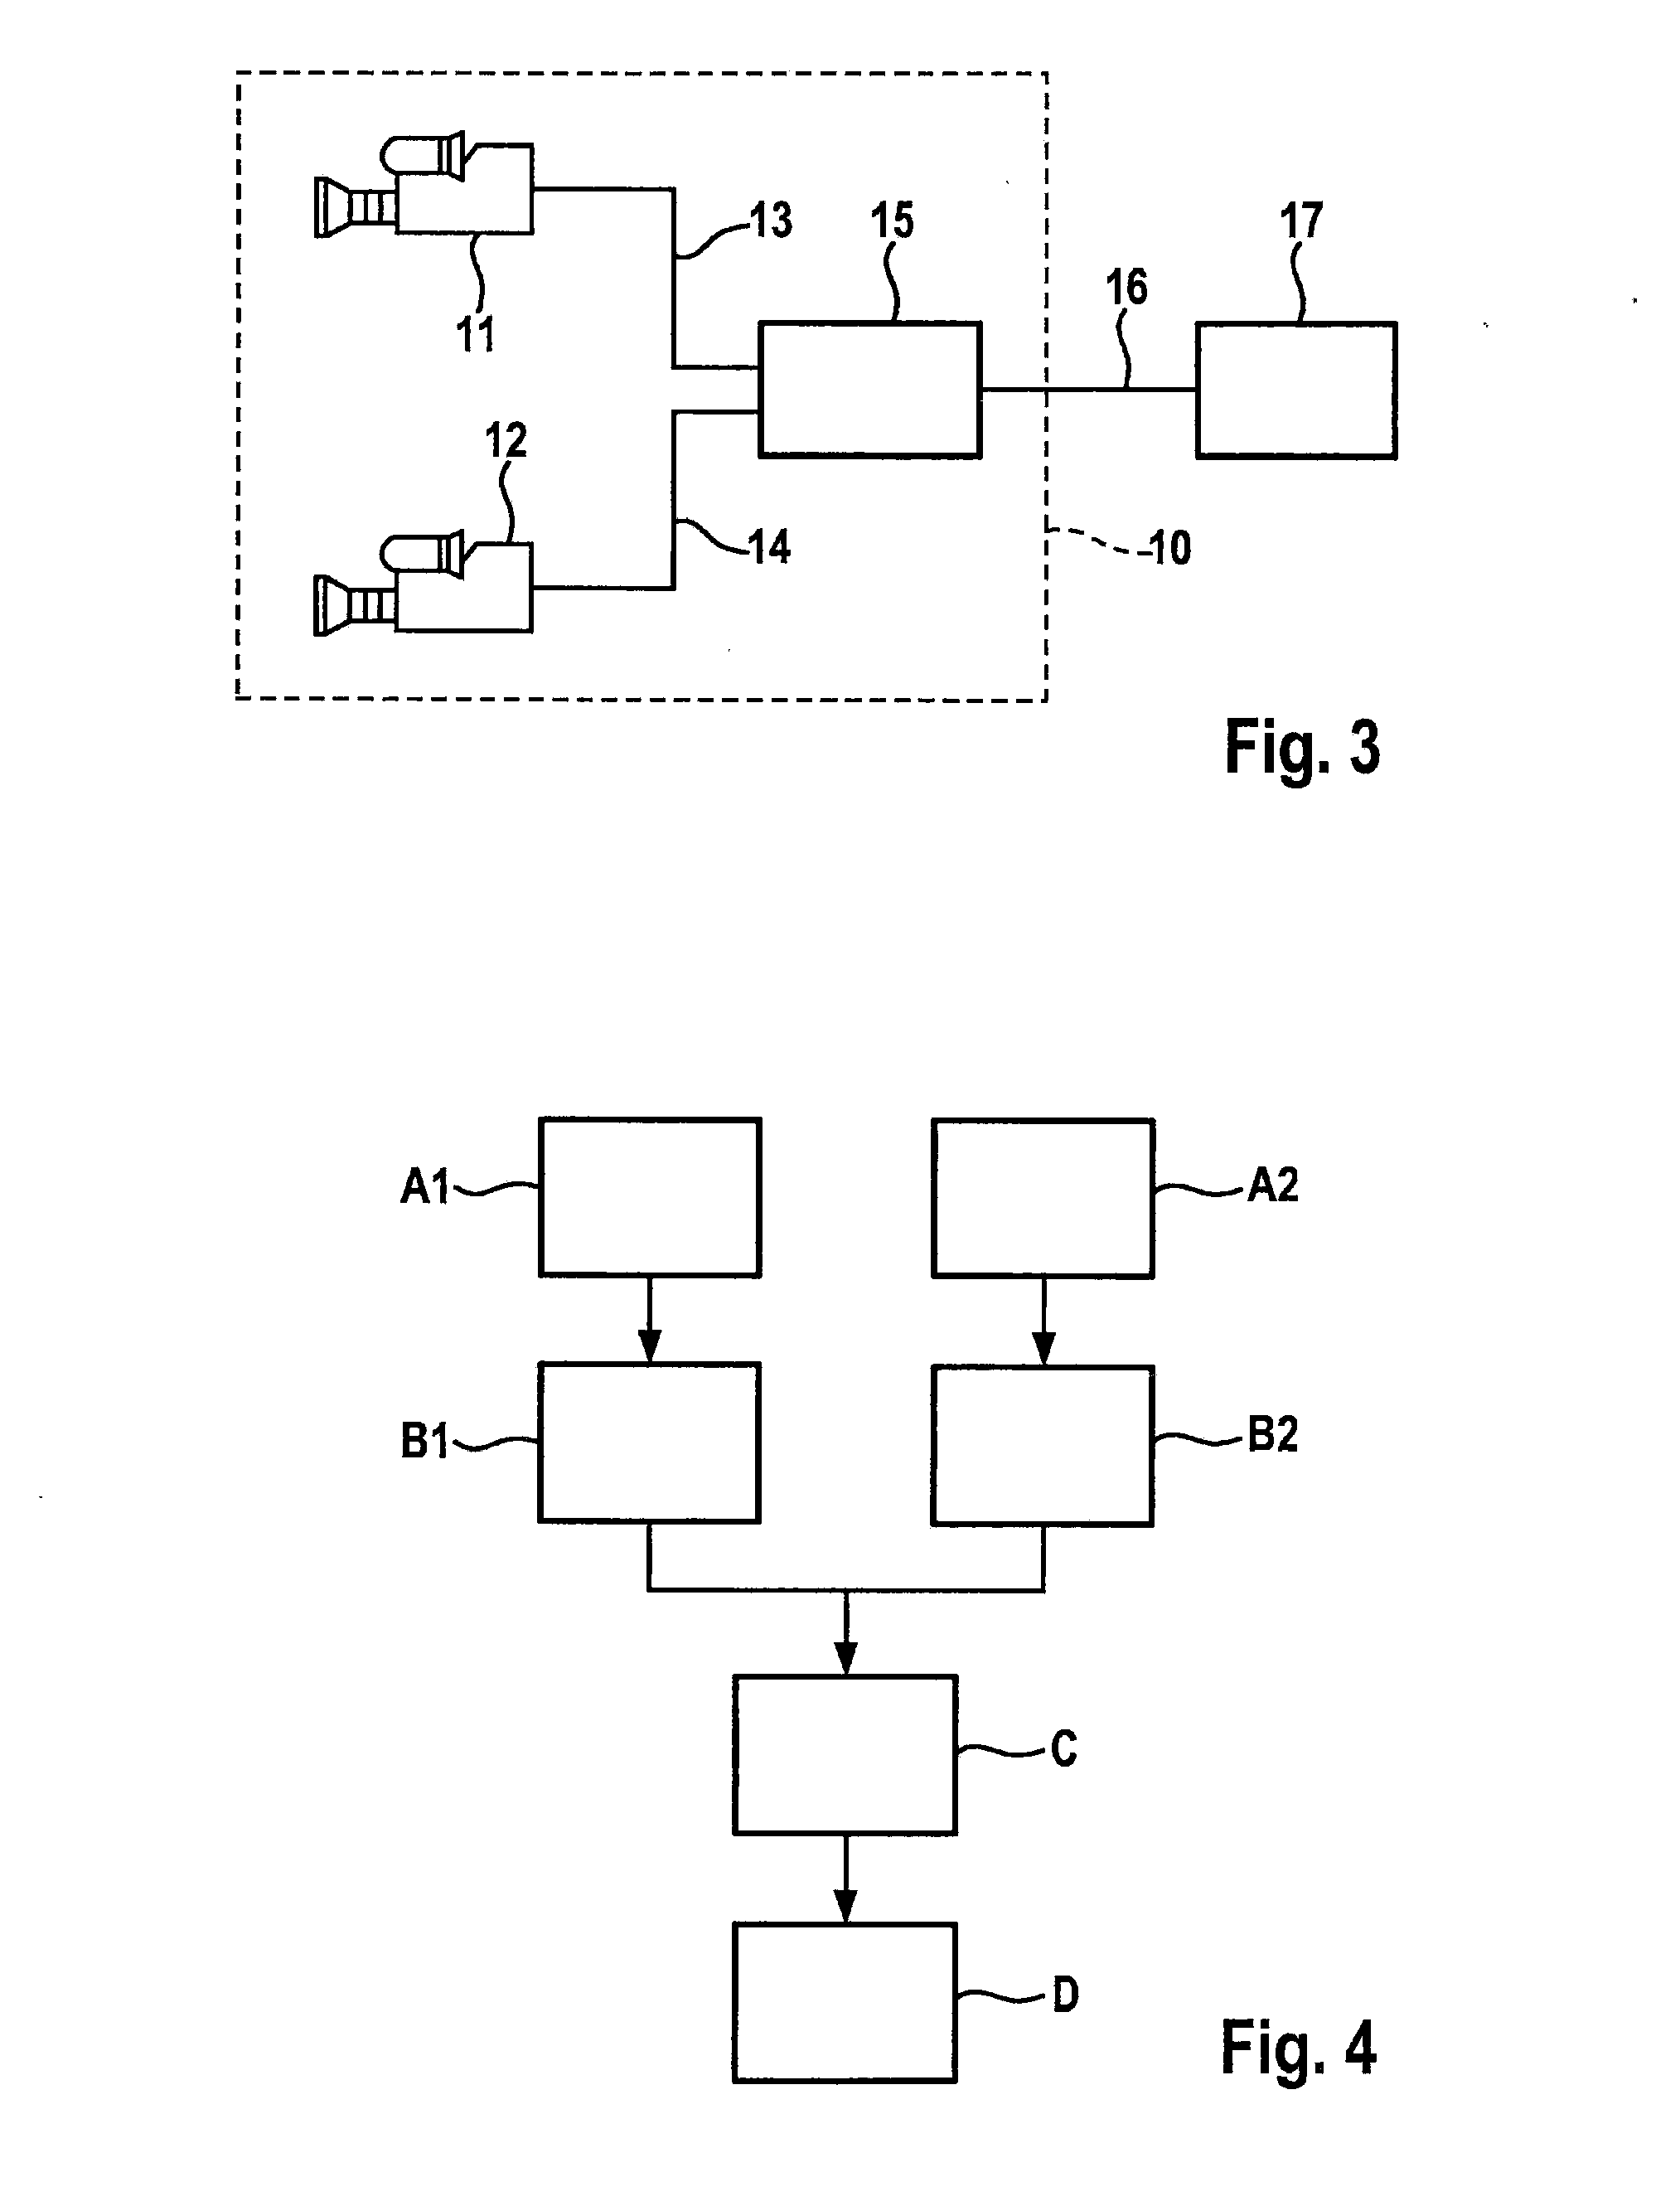 Image processing method for determining depth information from at least two input images recorded with the aid of a stereo camera system